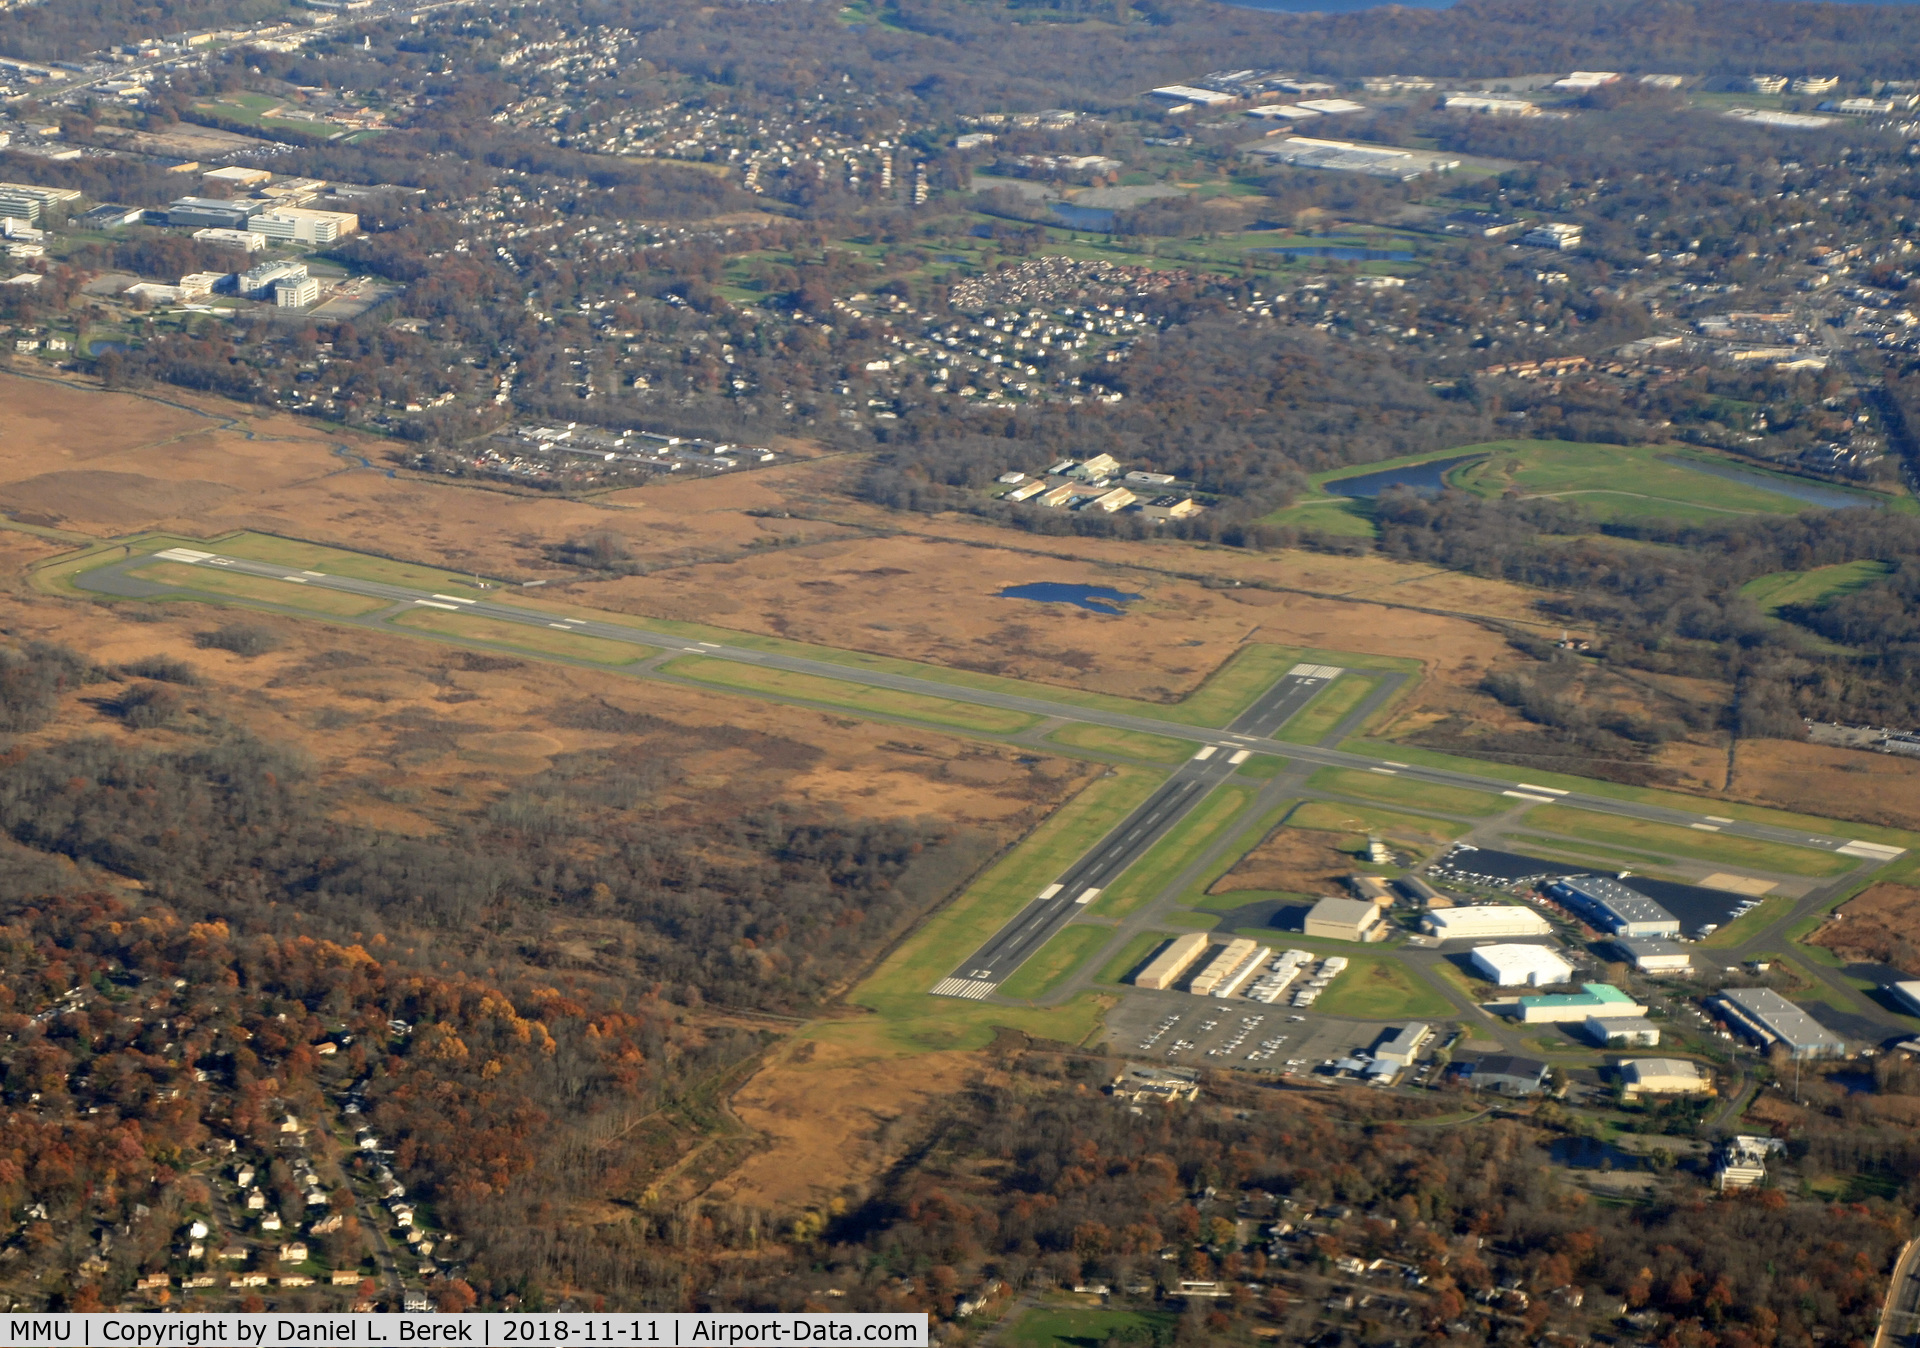 Morristown Municipal Airport (MMU) - Seen from the window of a commercial airliner